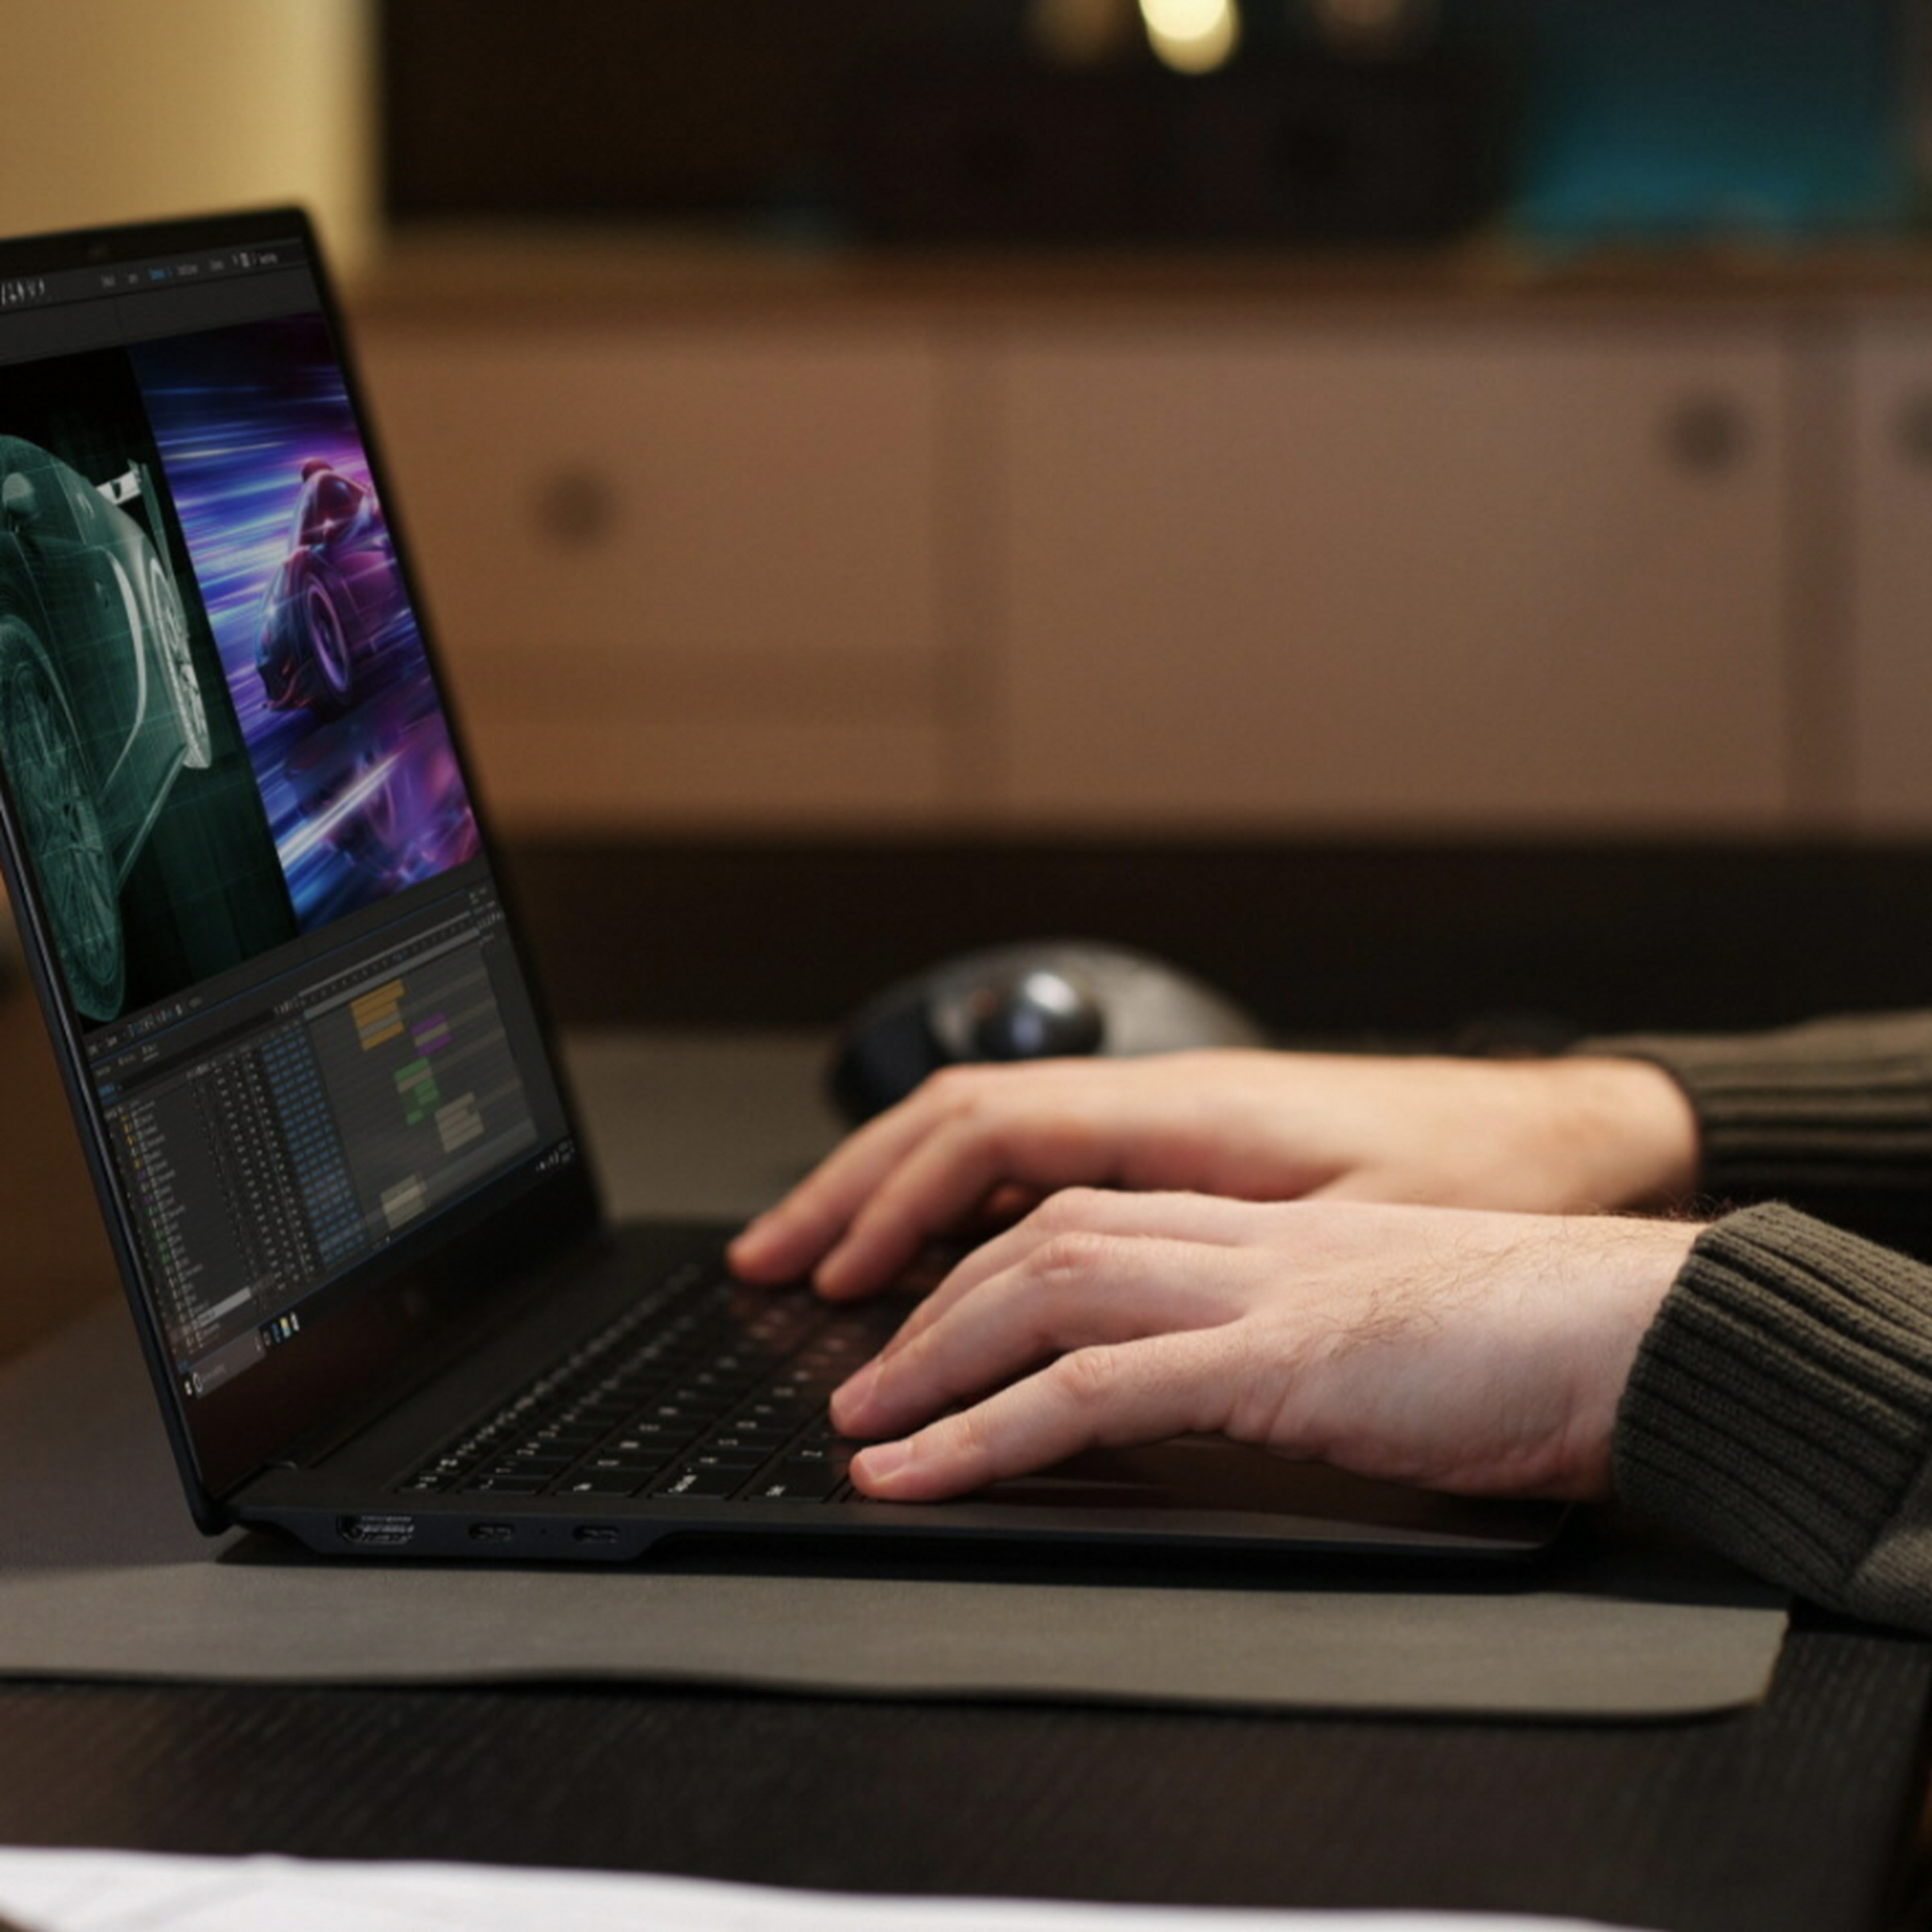 LG Gram Pro laptop shown from the side, sitting in a home office environment